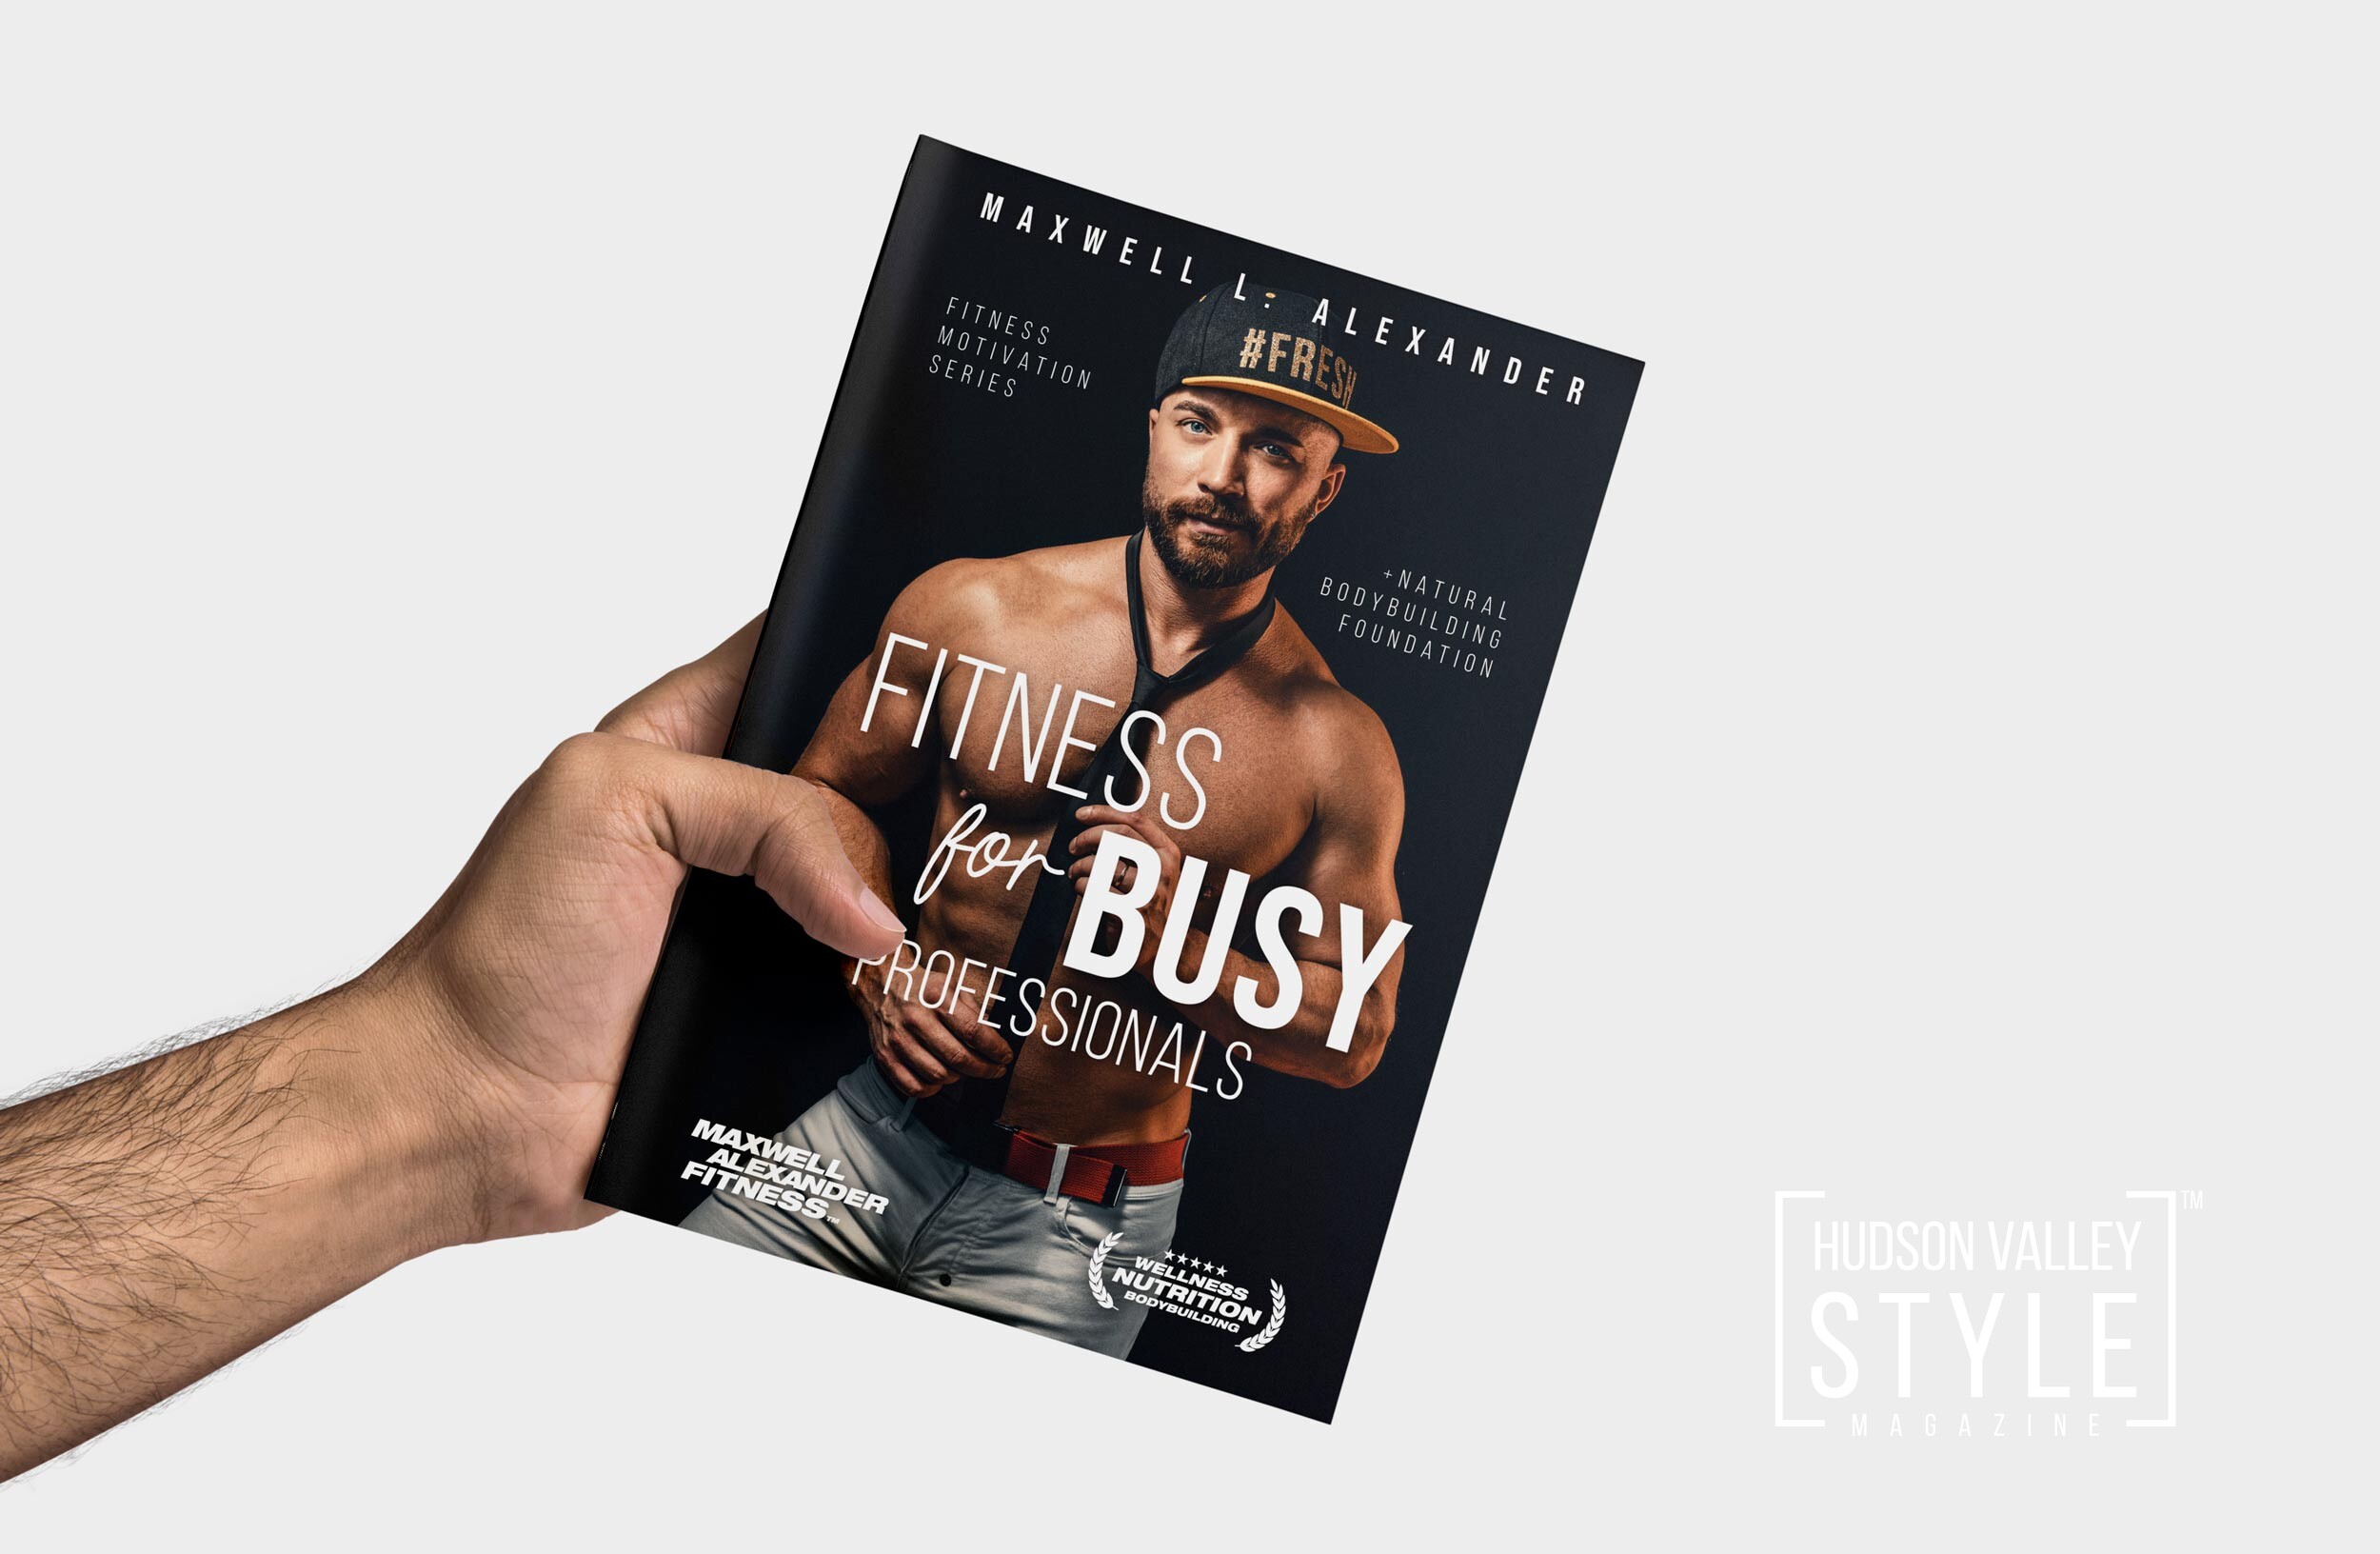 Fitness for Busy Professionals – New Book by Certified Elite Fitness Trainer and Bodybuilding Coach Maxwell Alexander